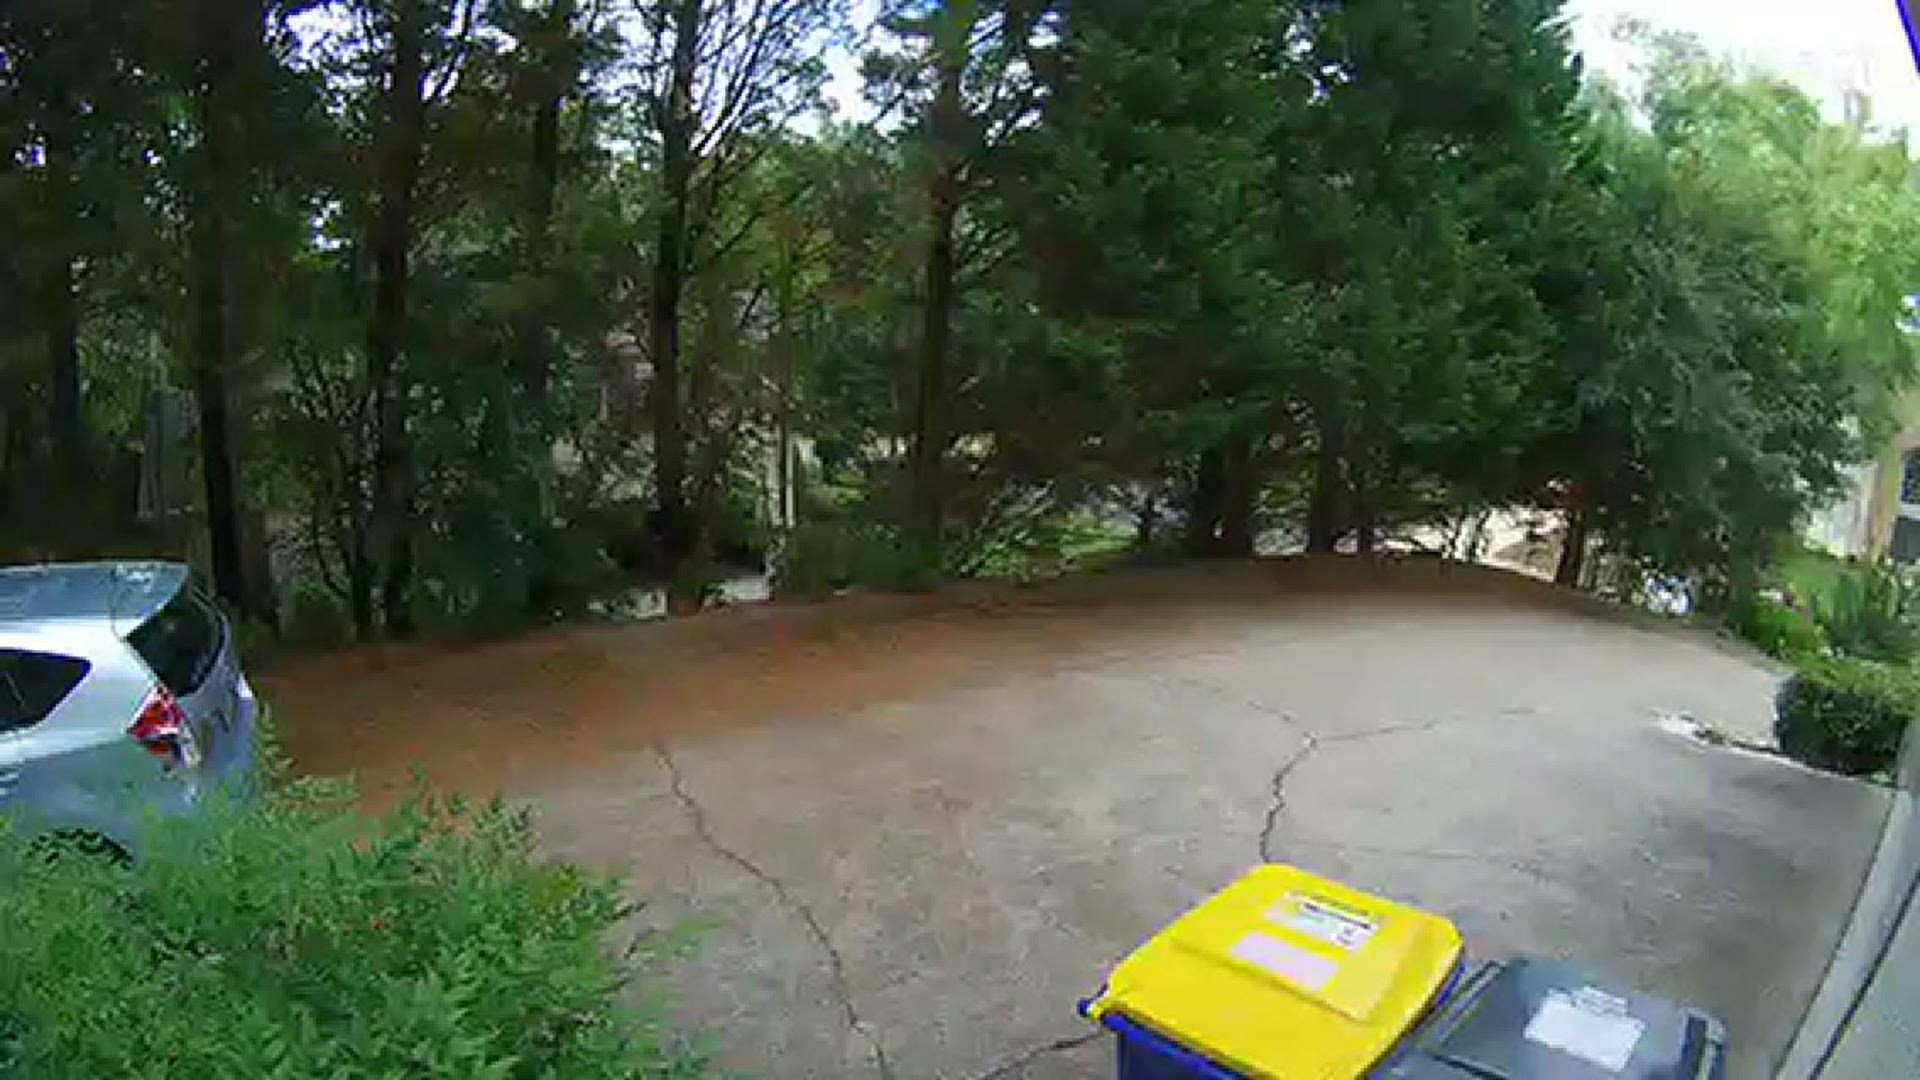 A local resident shared the video online with neighbors after running a recording back and spotting the bear on a journey through the driveway.